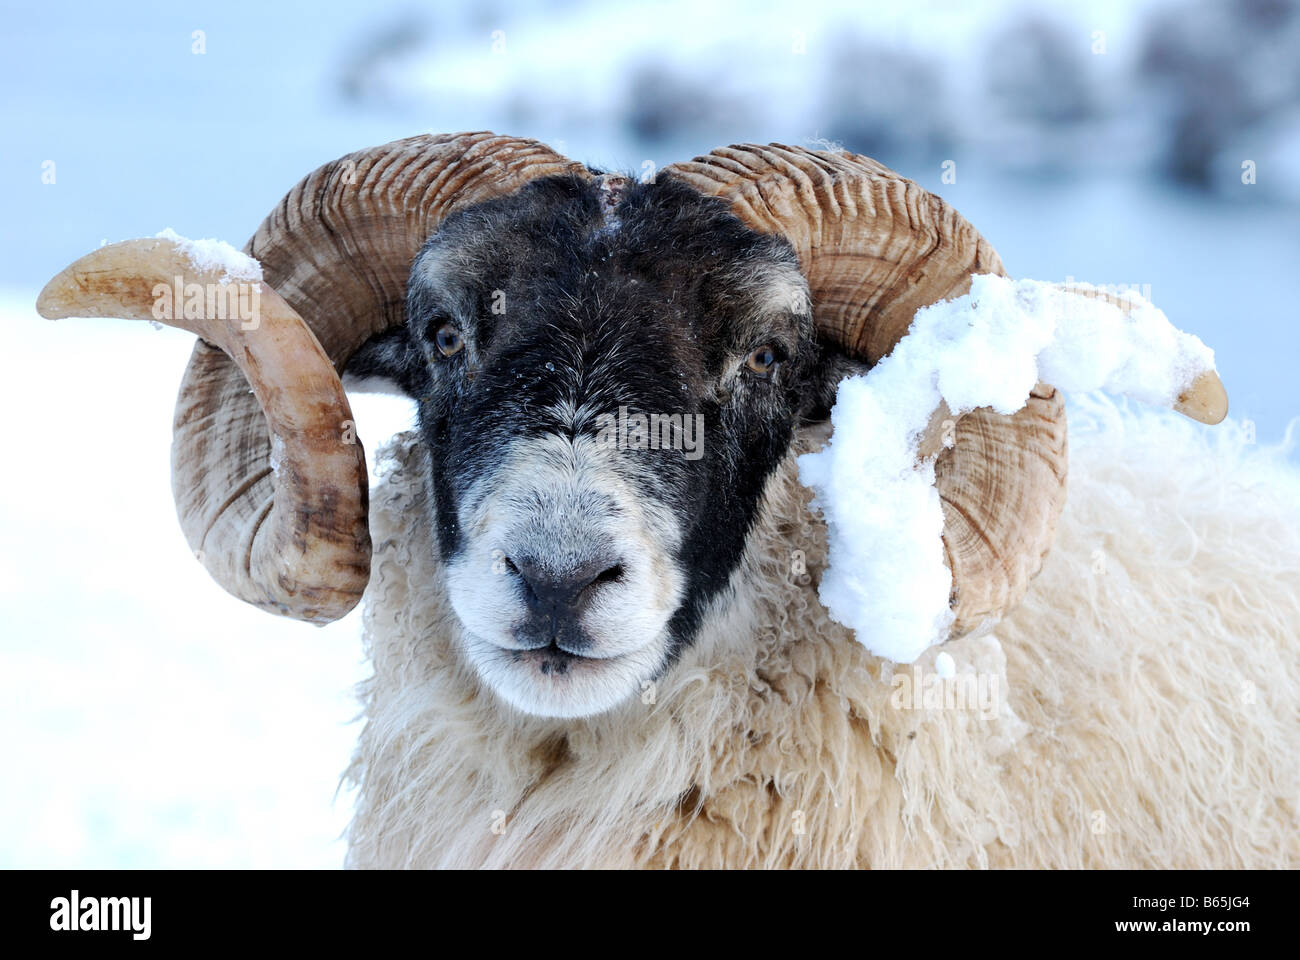 Ram animal hi-res stock and images - Alamy